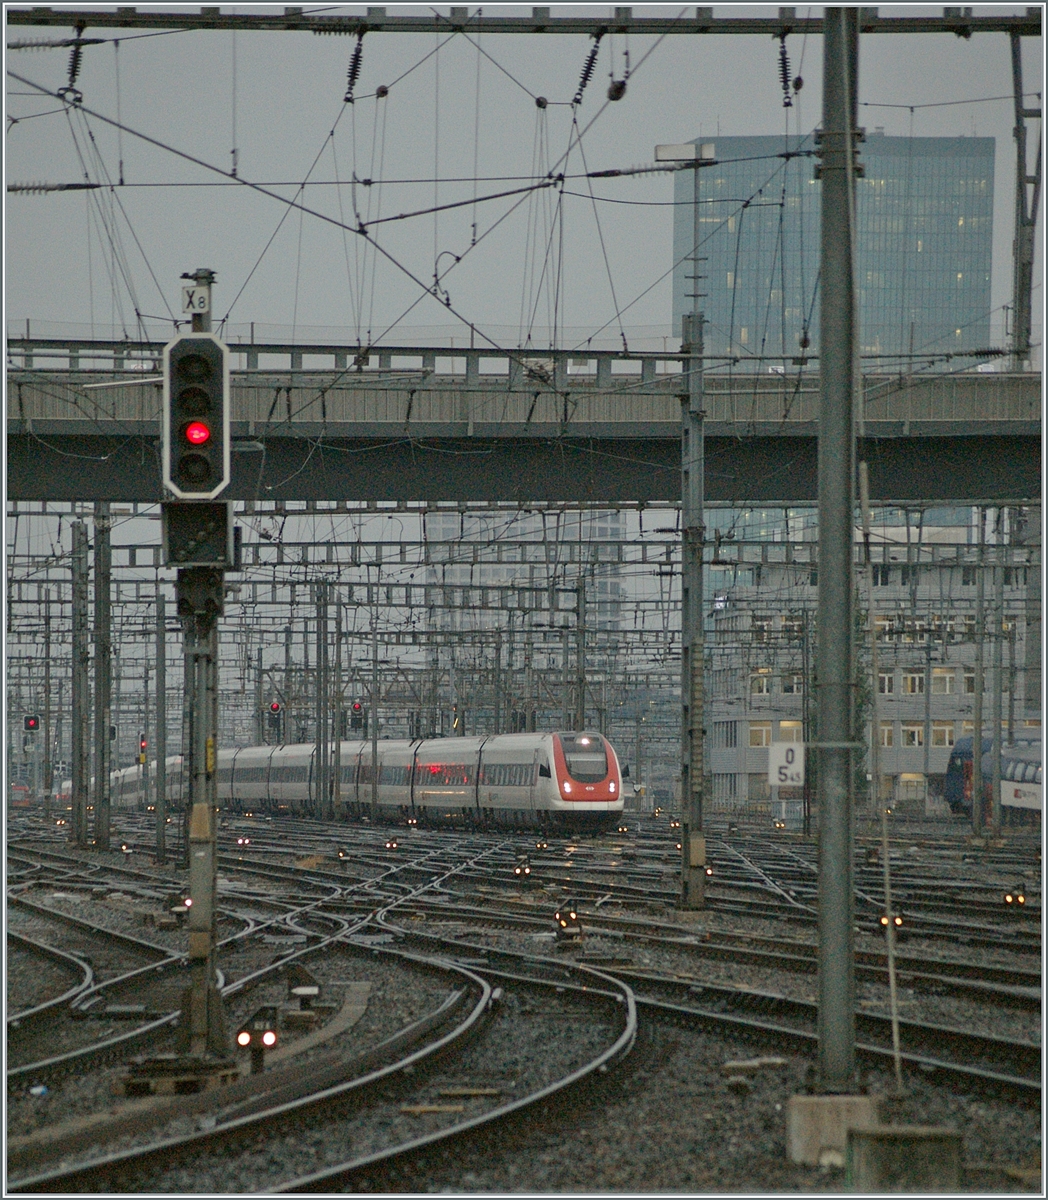 In diffuse morning light, an SBB ICN arrives at Zurich main station.

Oct 19, 2023